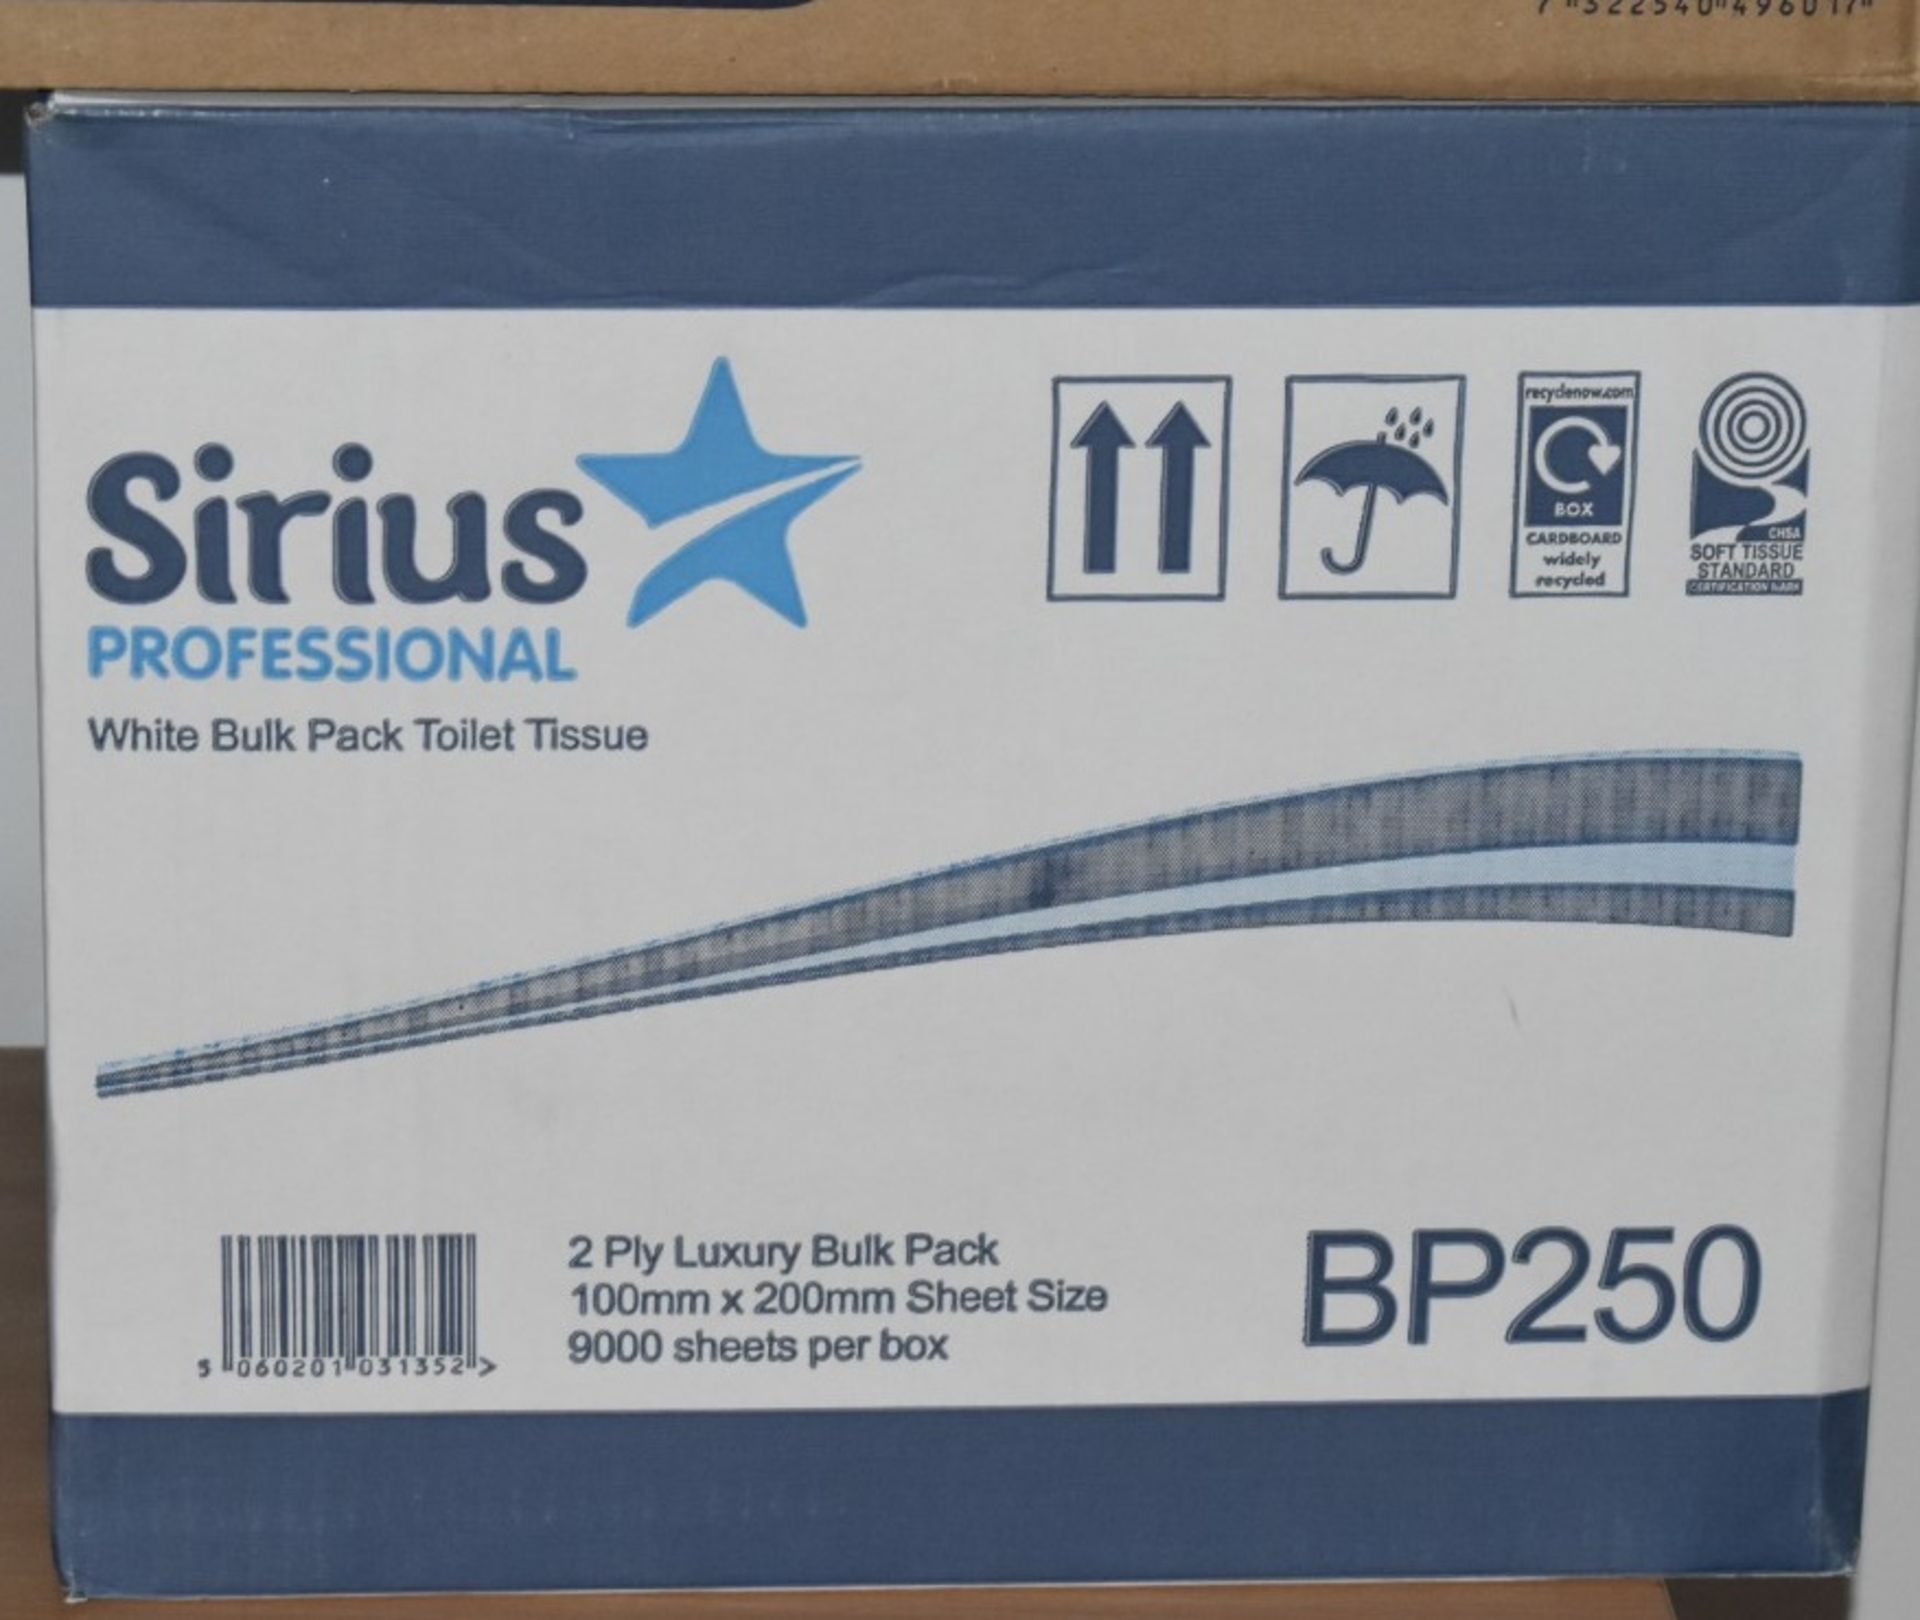 4 x Boxes of Tork & Sirius Toilet Paper - New and Sealed - Ref: FF135 U - CL544 - Location: Leeds, - Image 2 of 4